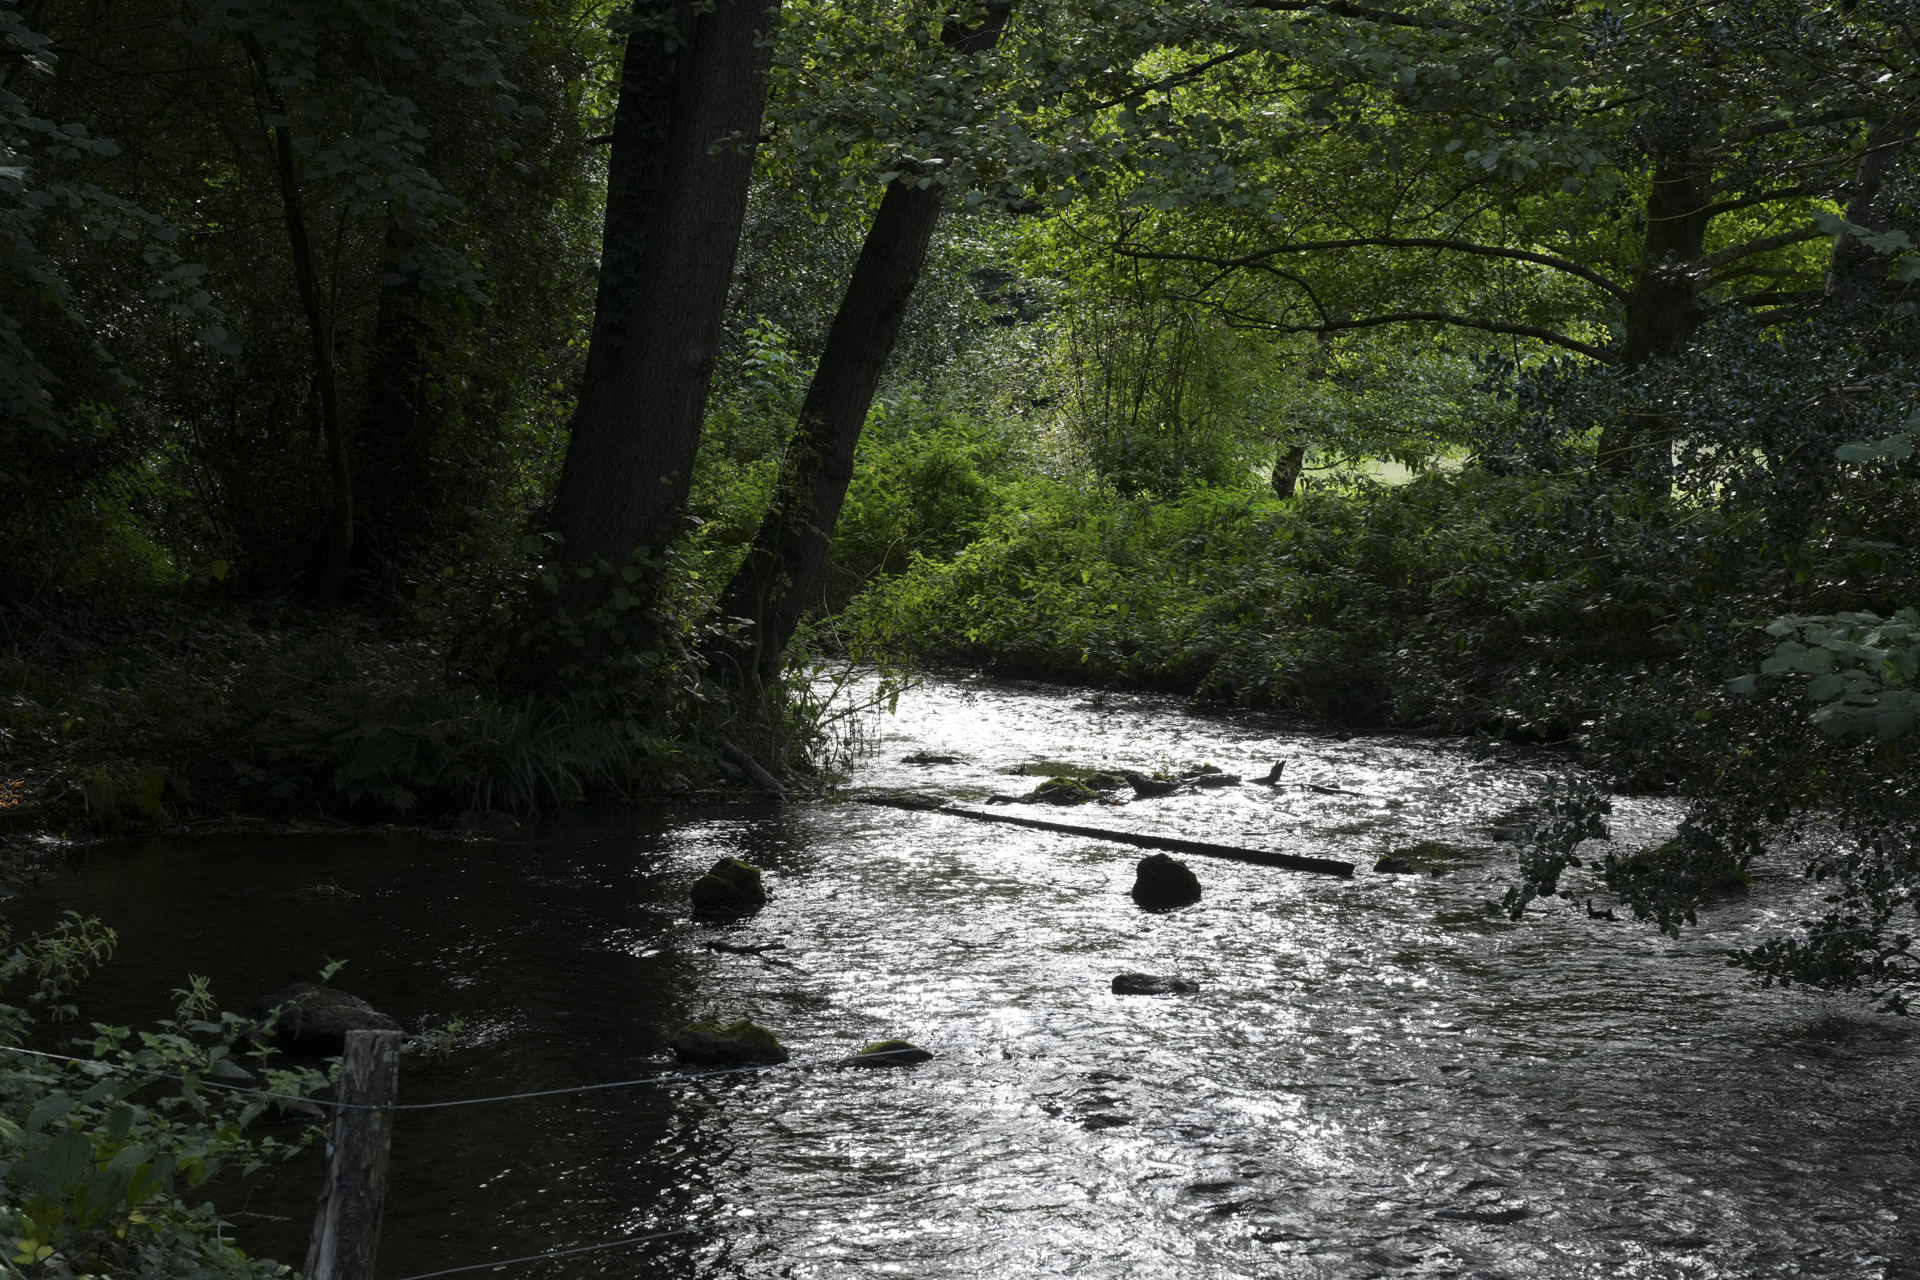 A stream reflecting bright light, taken with the Sony FE 20-70mm F4 lens and A7C R